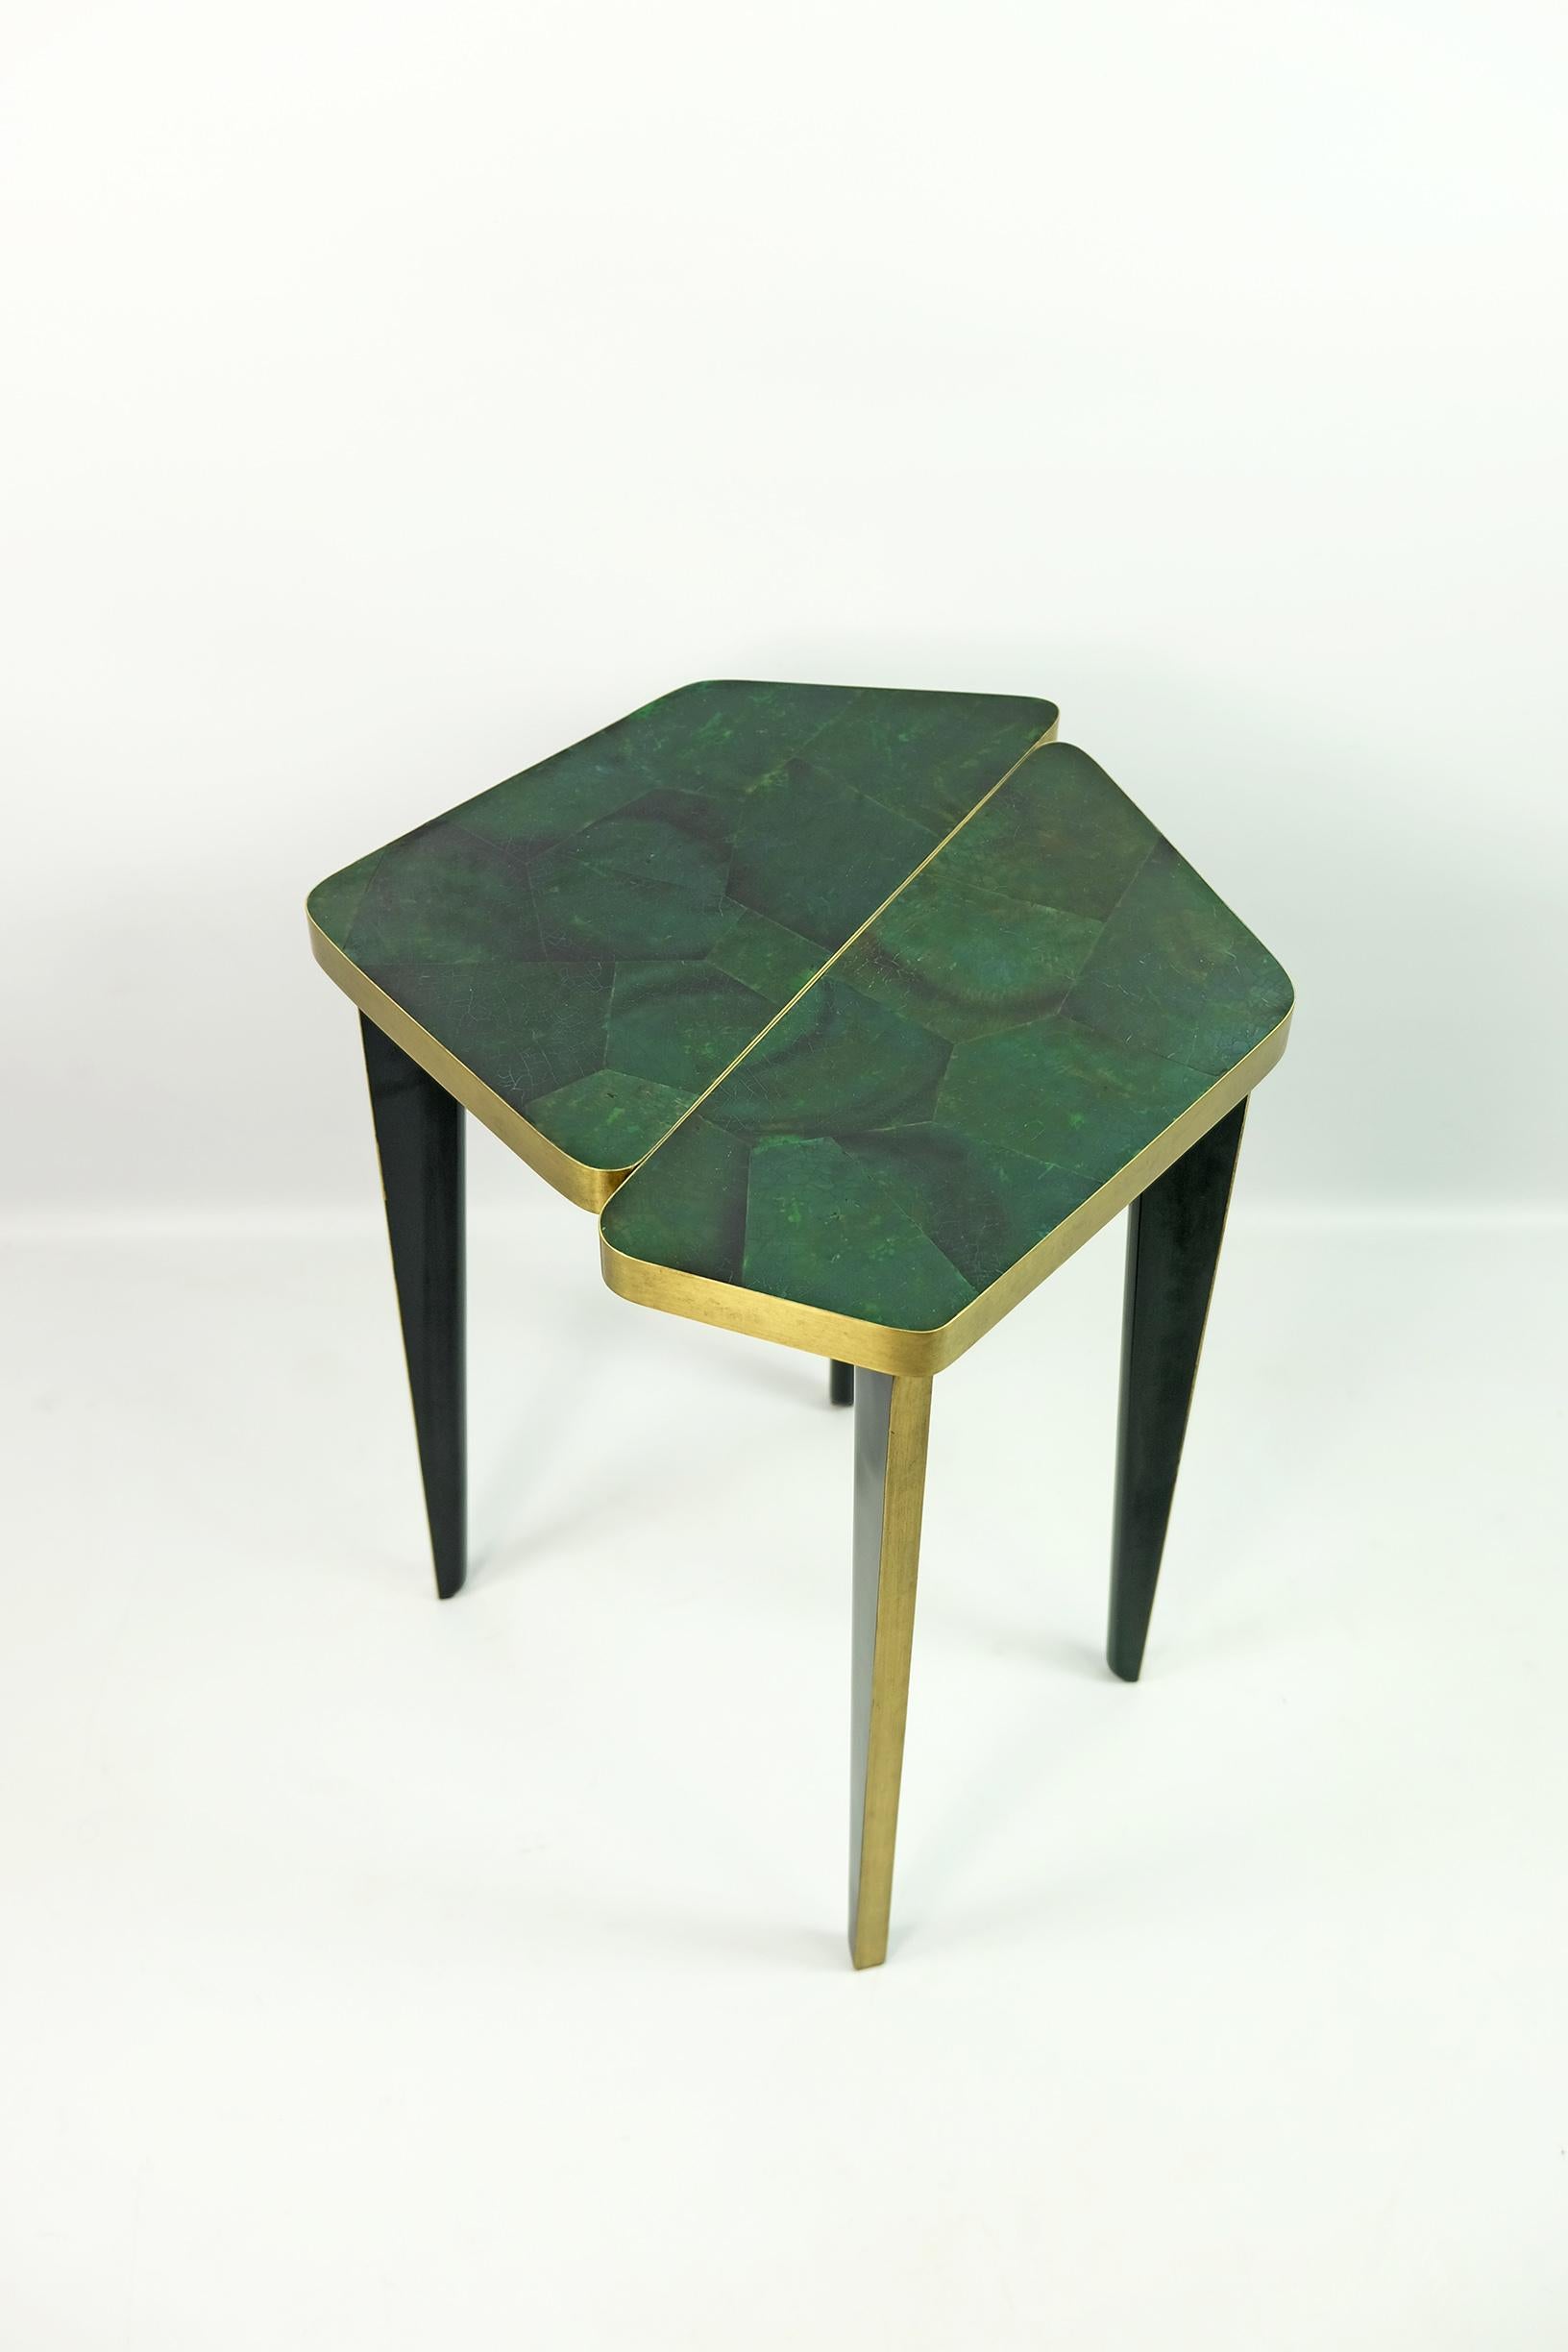 The side table is made of a green polished shell marquetry top with antic brass edges.

The legs are in black wood with antic brass edges.

Dimensions:
16.5